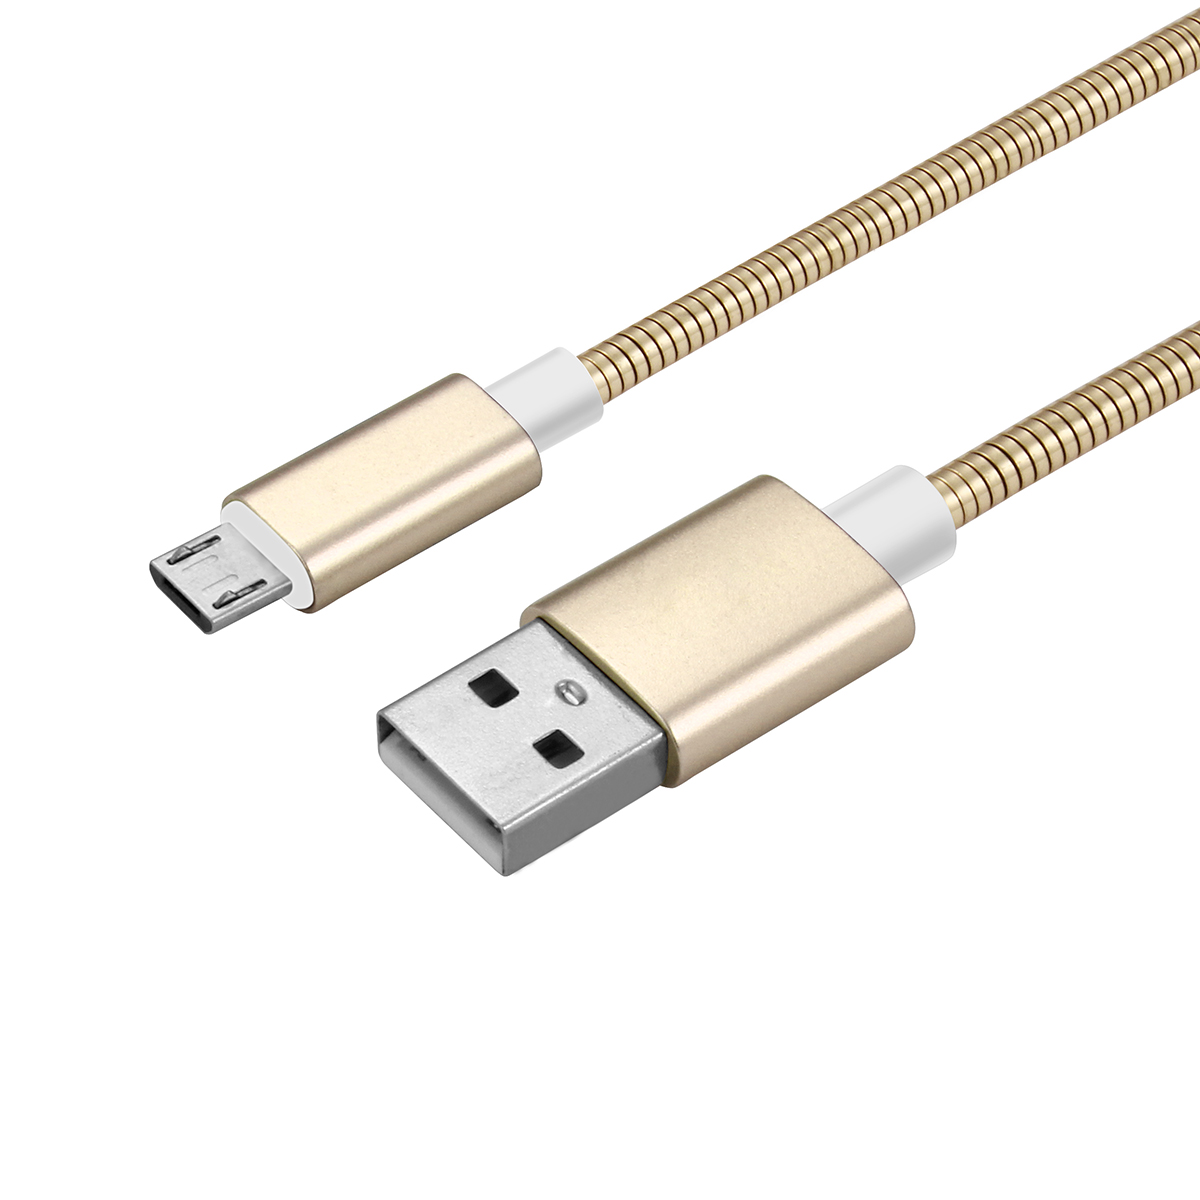 Metal Stainless Steel Spring Woven Micro USB Charging Data Cable for Android Devices - Gold